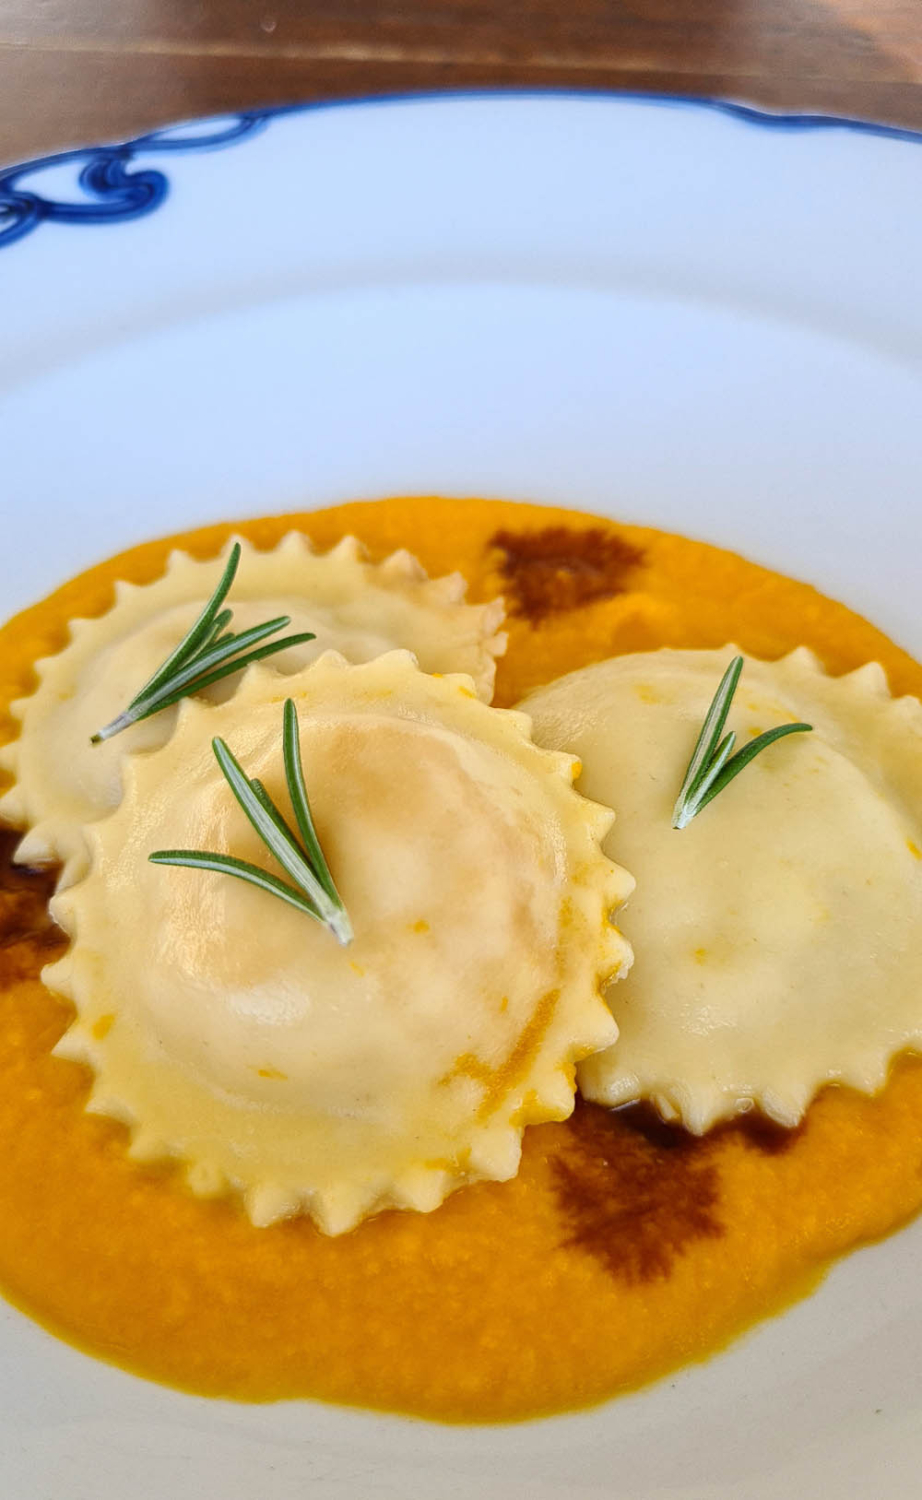 Raviolli with baccala and carrot sauce 